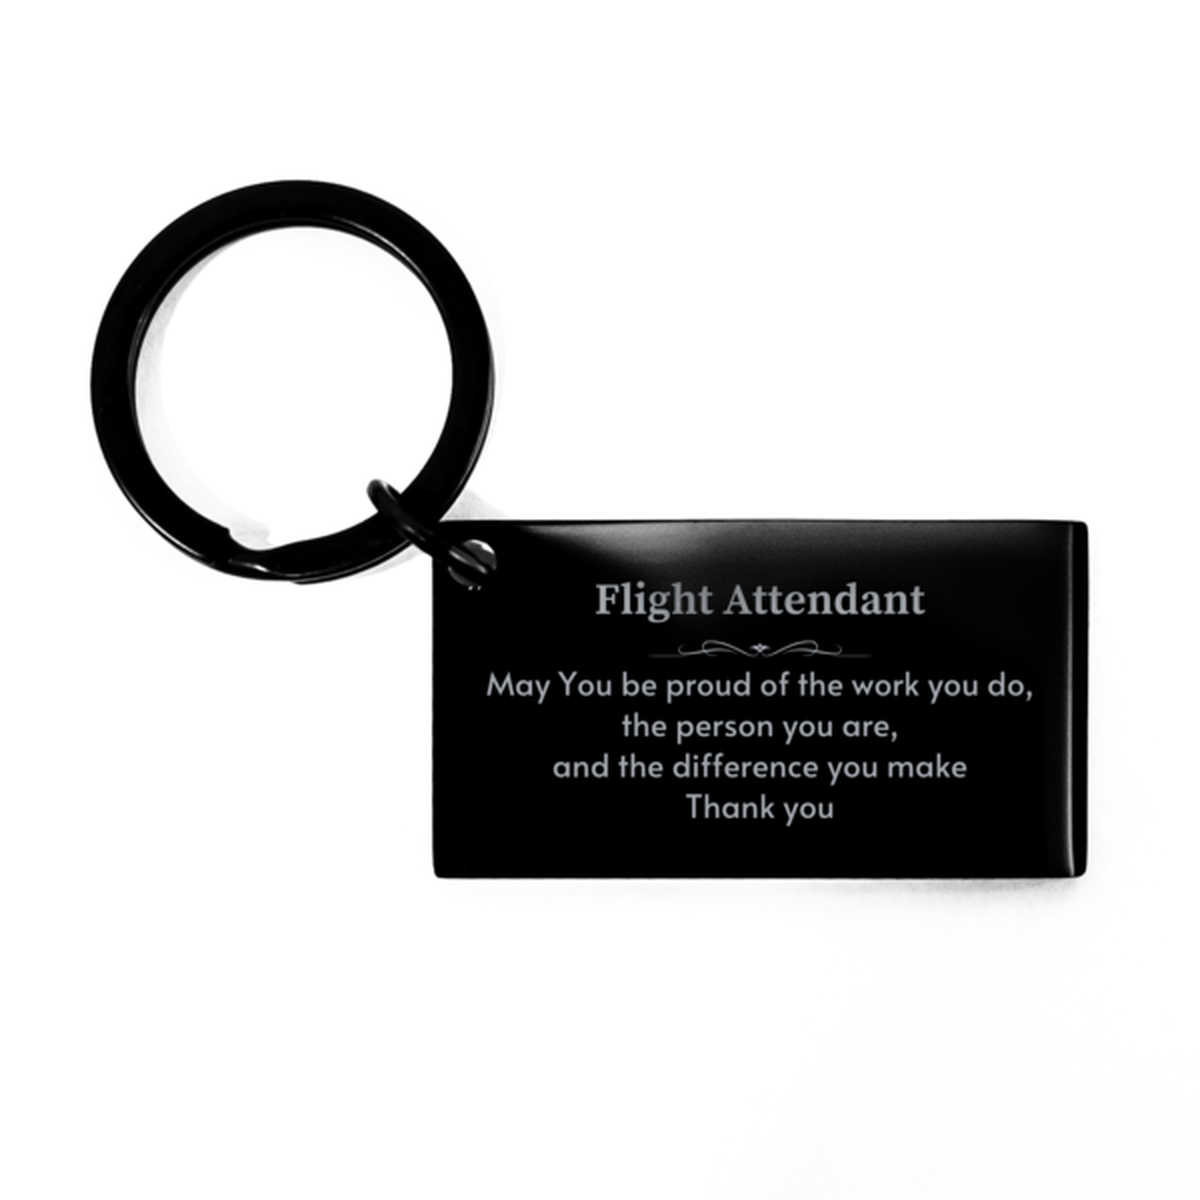 Heartwarming Keychain Retirement Coworkers Gifts for Flight Attendant, Linguist May You be proud of the work you do, the person you are Gifts for Boss Men Women Friends